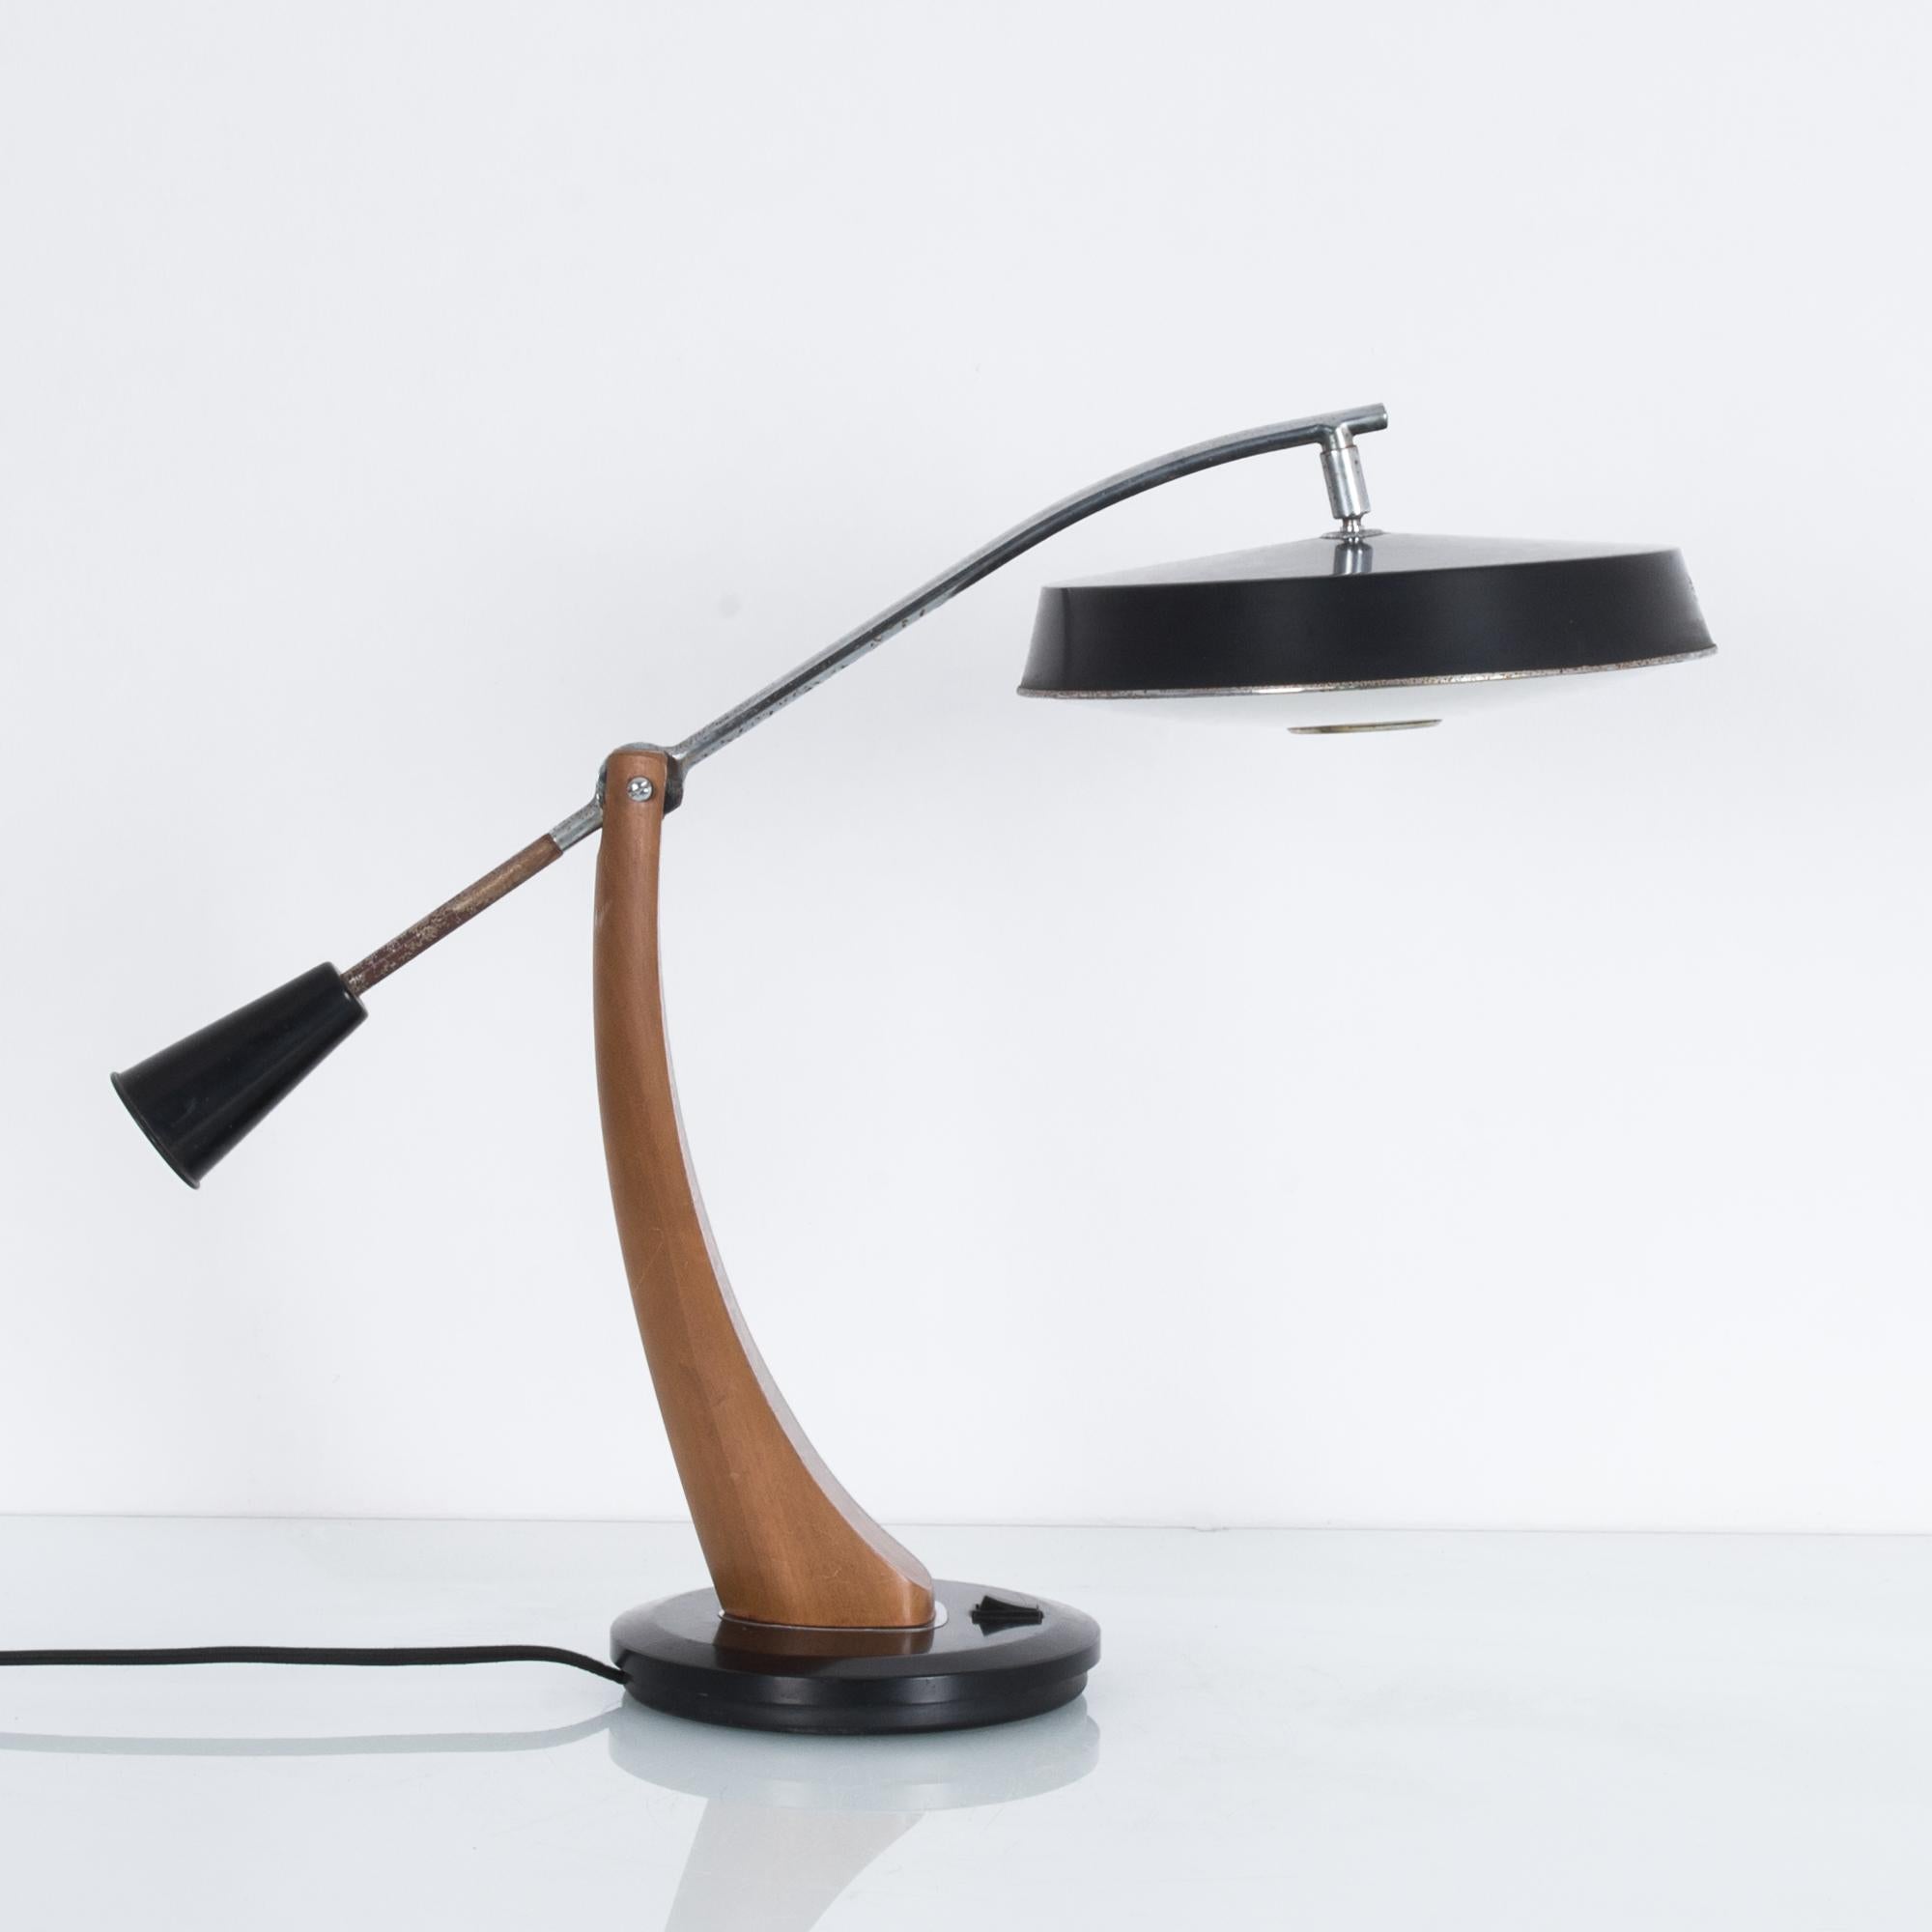 A pendulum desk lamp made by Spanish designers Fase President. A curved wooden arm with a counterpoised metal rod supports a black lacquered lampshade while allowing the bulb to be raised and lowered. The convex, gently frosted lower disc of the